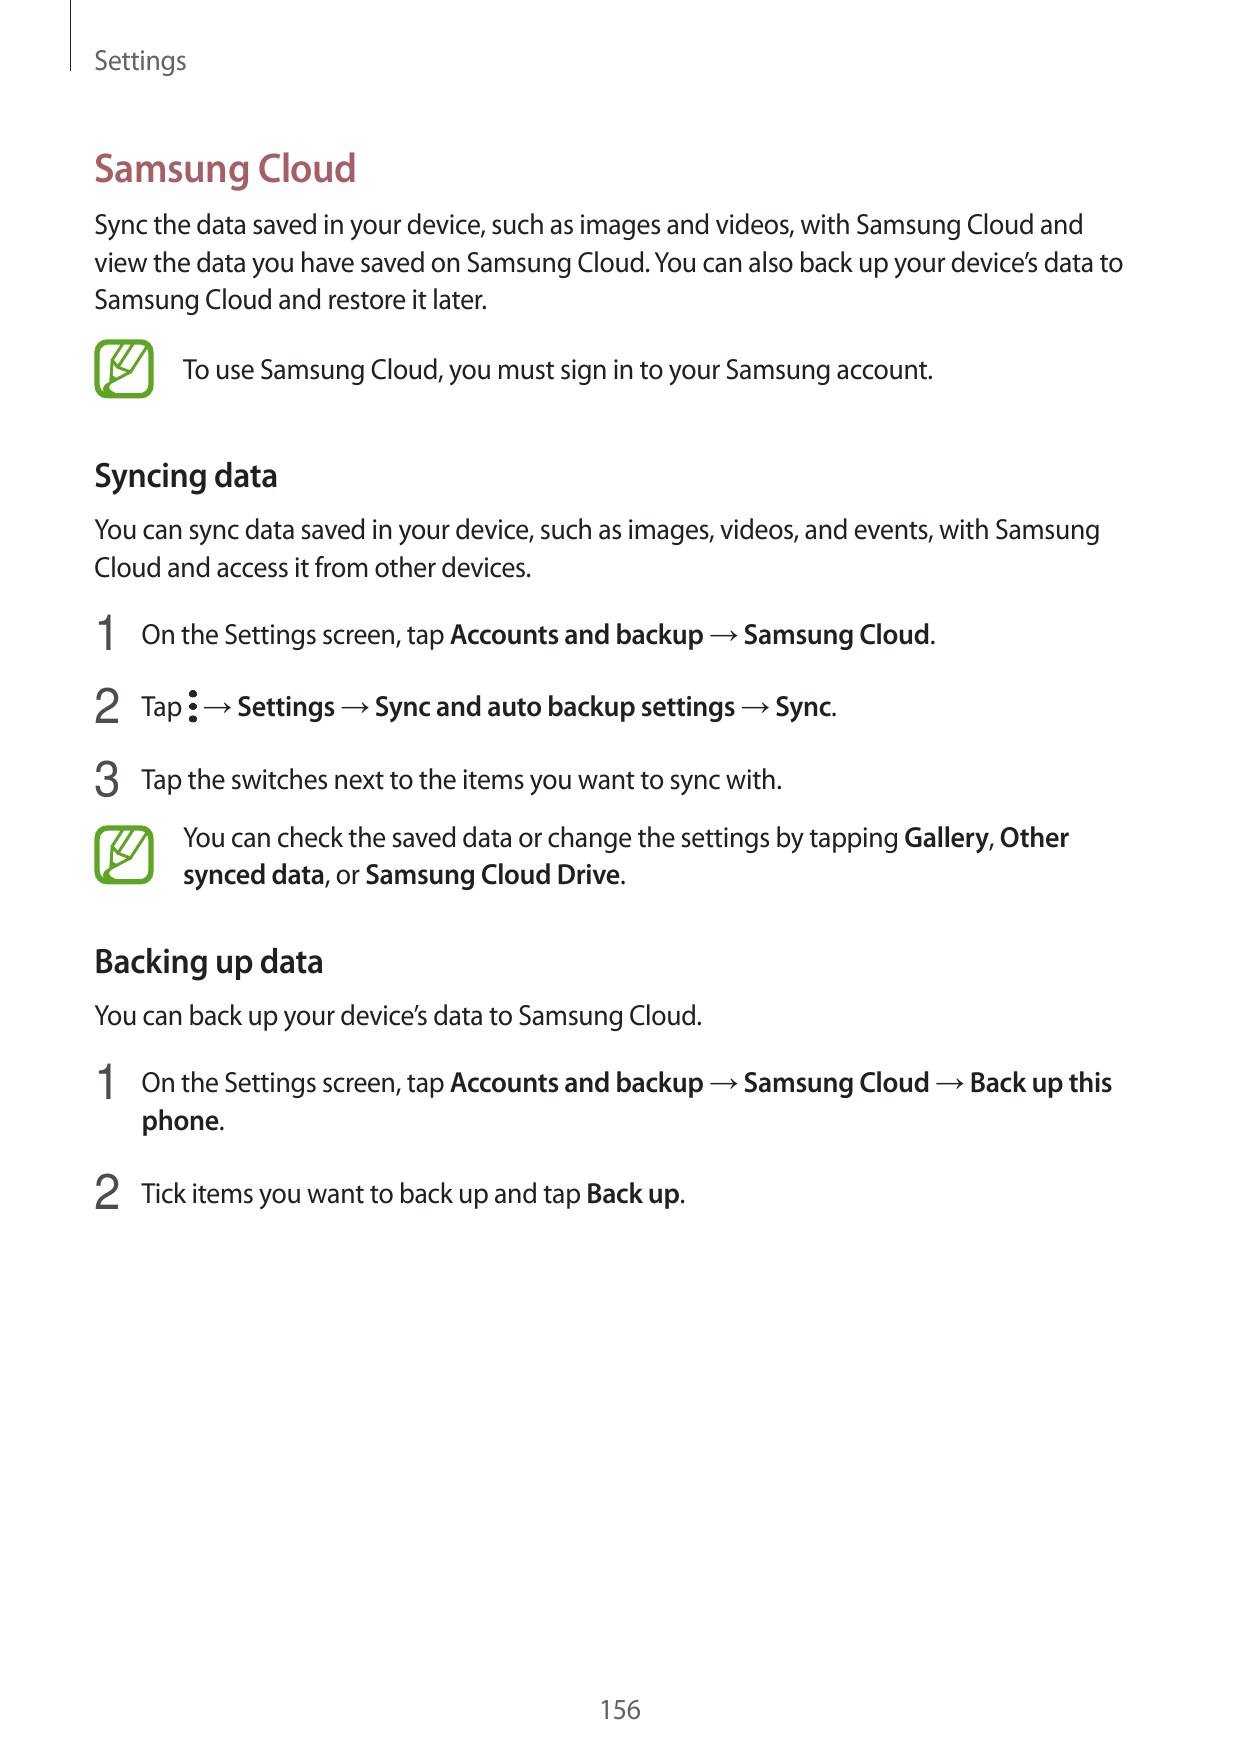 SettingsSamsung CloudSync the data saved in your device, such as images and videos, with Samsung Cloud andview the data you have